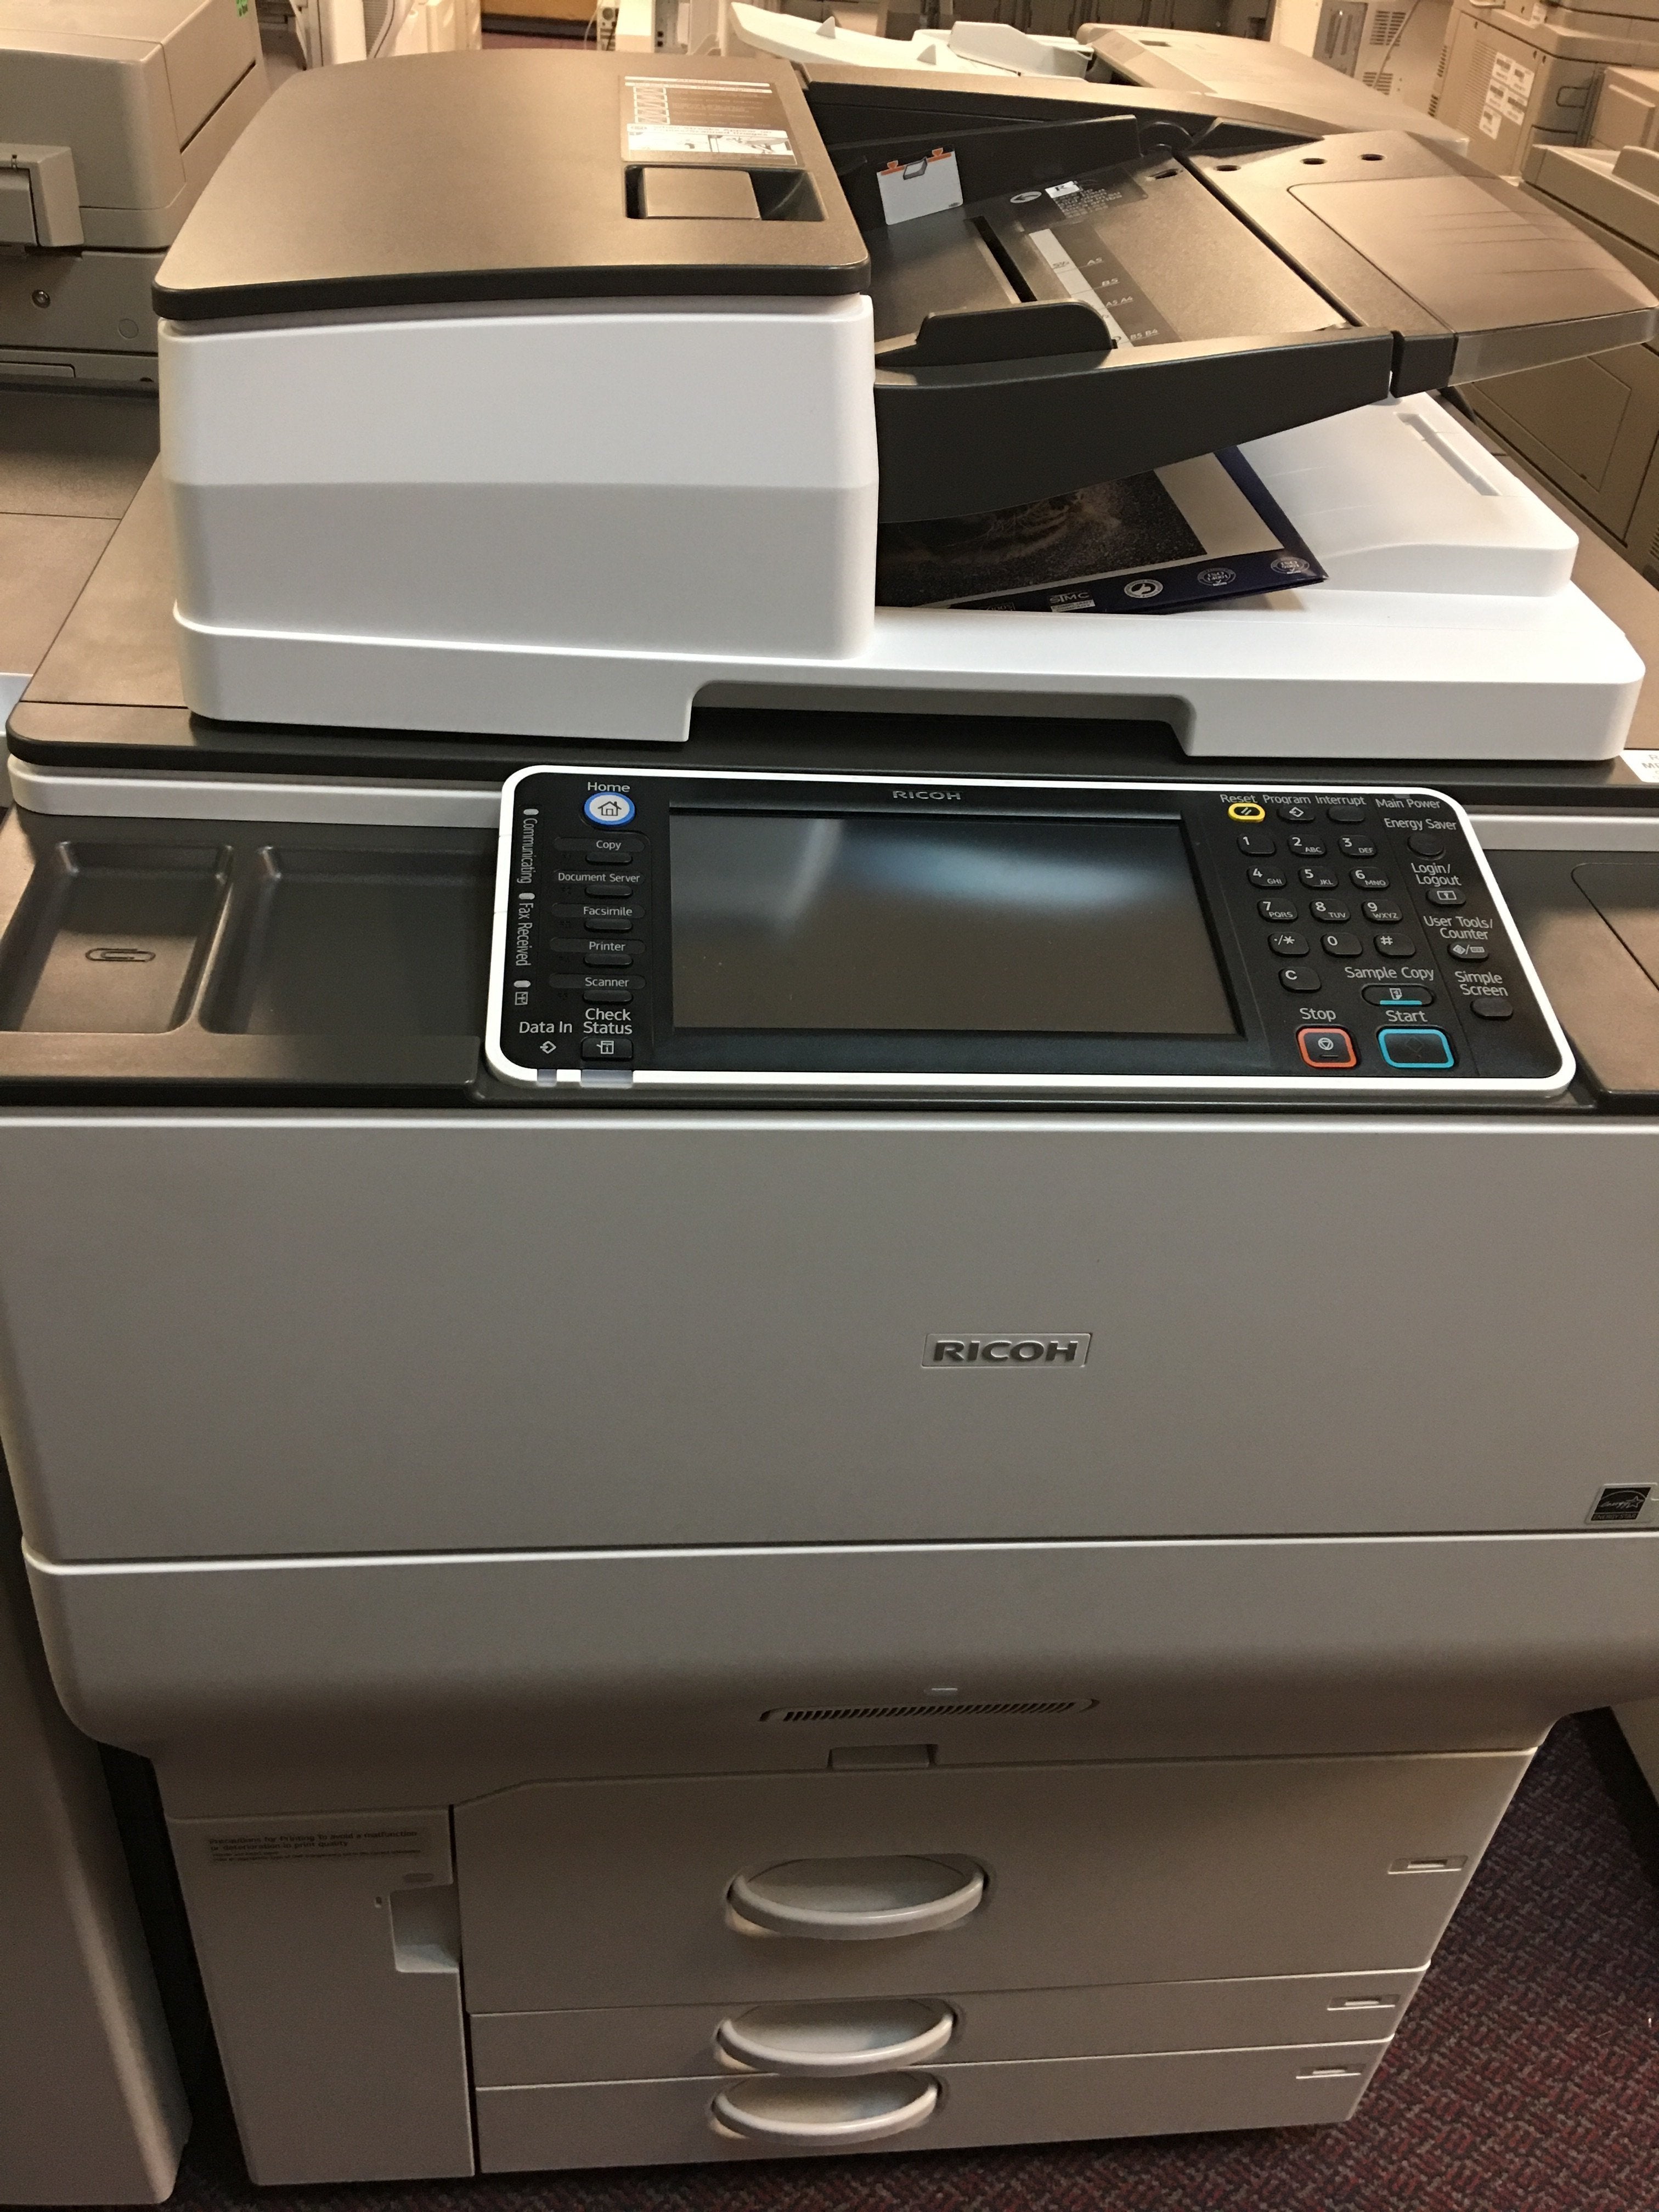 Absolute Toner Ricoh MP C6502 6502 Color Laser High Speed 65 PPM Production level Printer Copier Scanner 12x18 - Repossessed only 116k pages Warehouse Copier